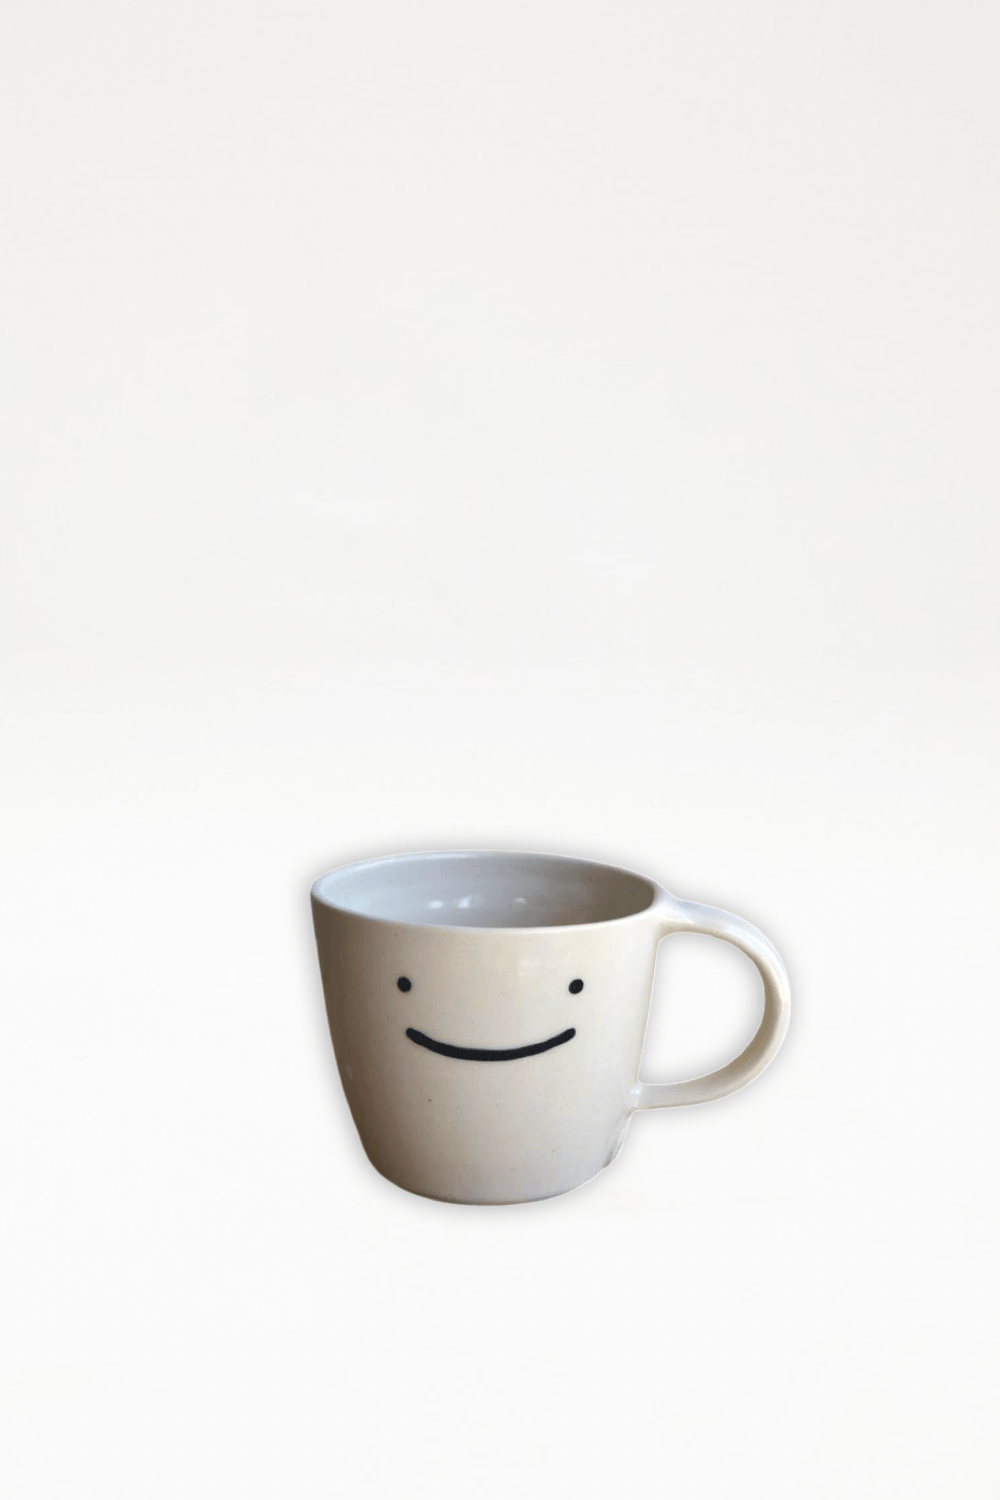 Maddie Deere Smile Cup - White Clay - Small - Ensemble Studios